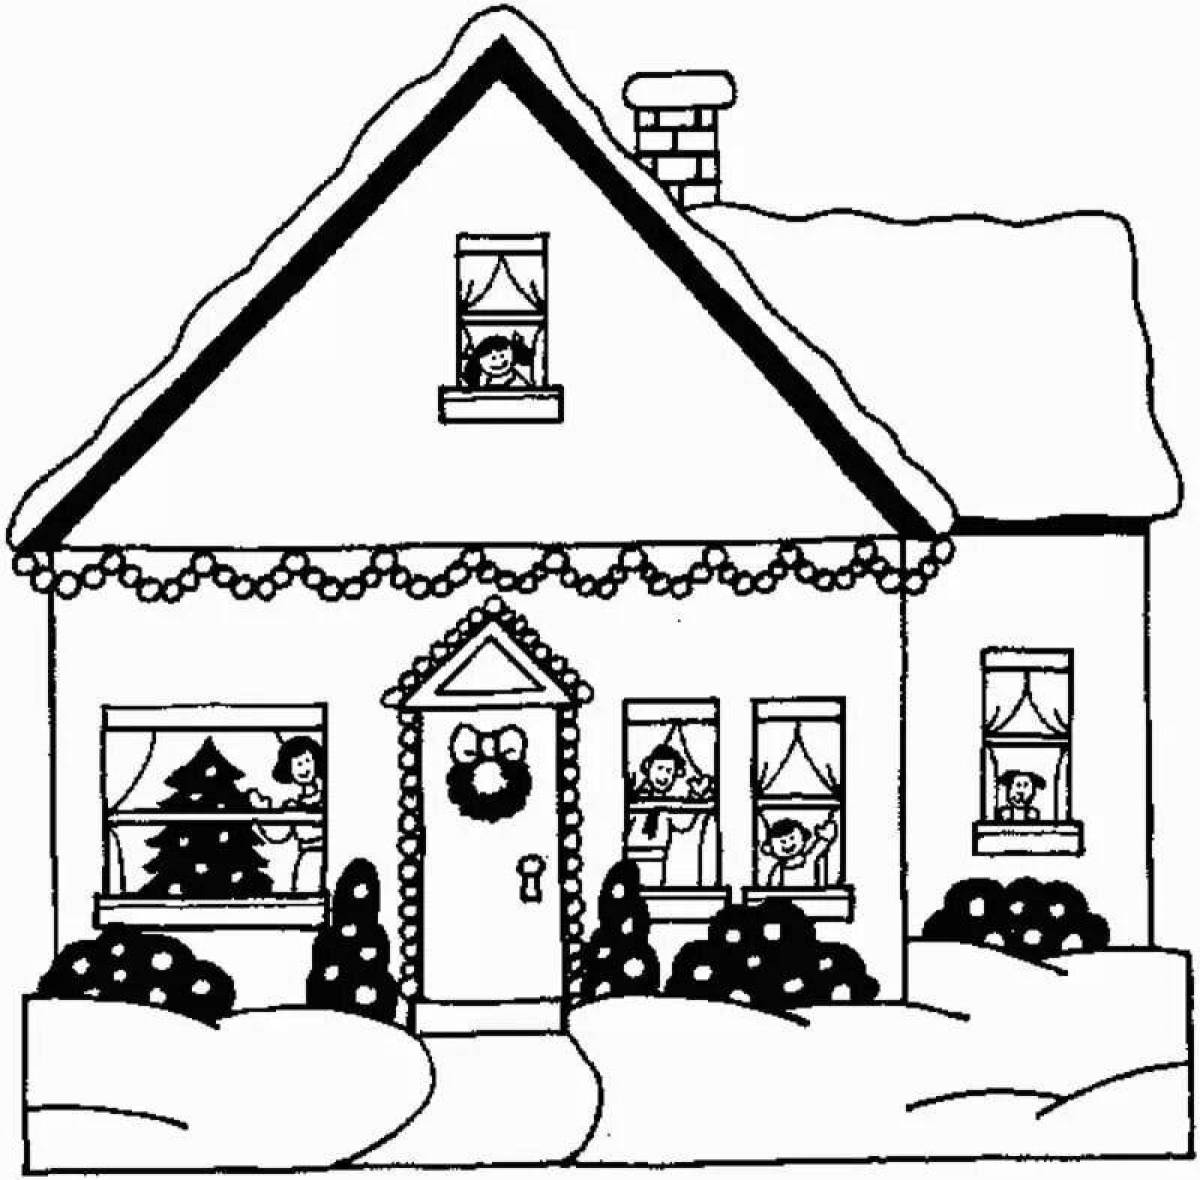 Animated drawing of a house